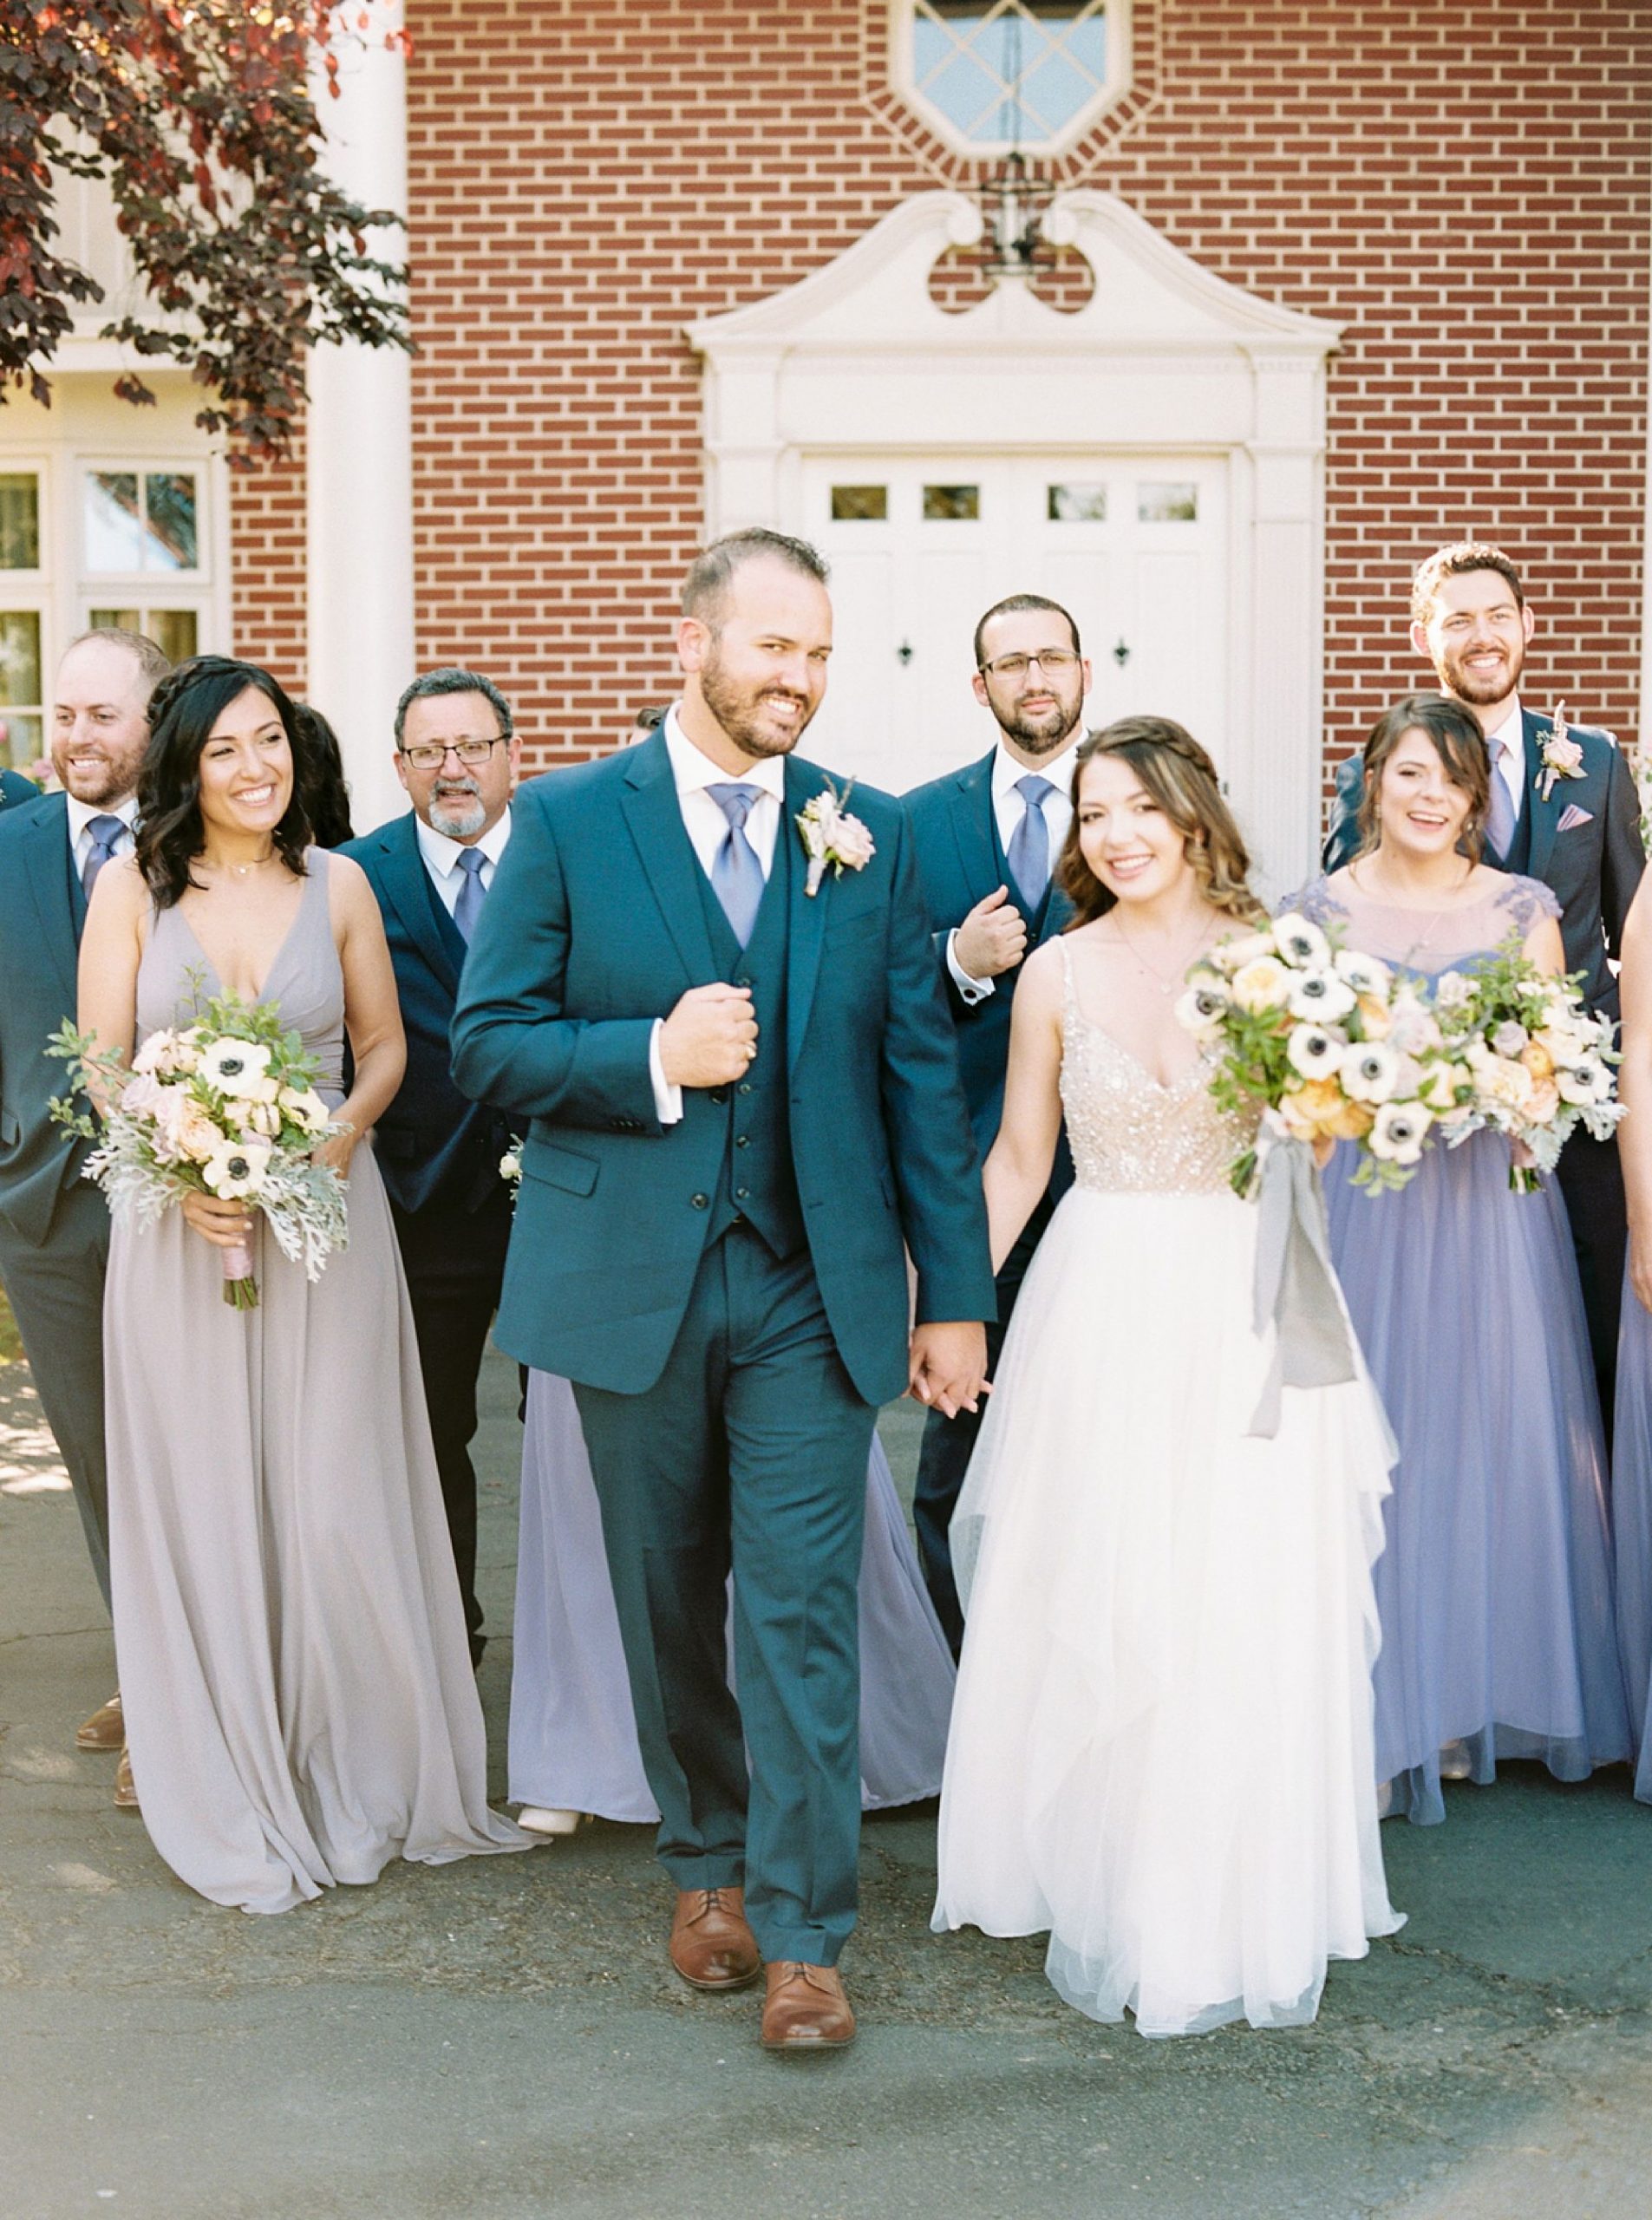 Lavender Infused Wedding at Grace Vineyards - Inspired by This